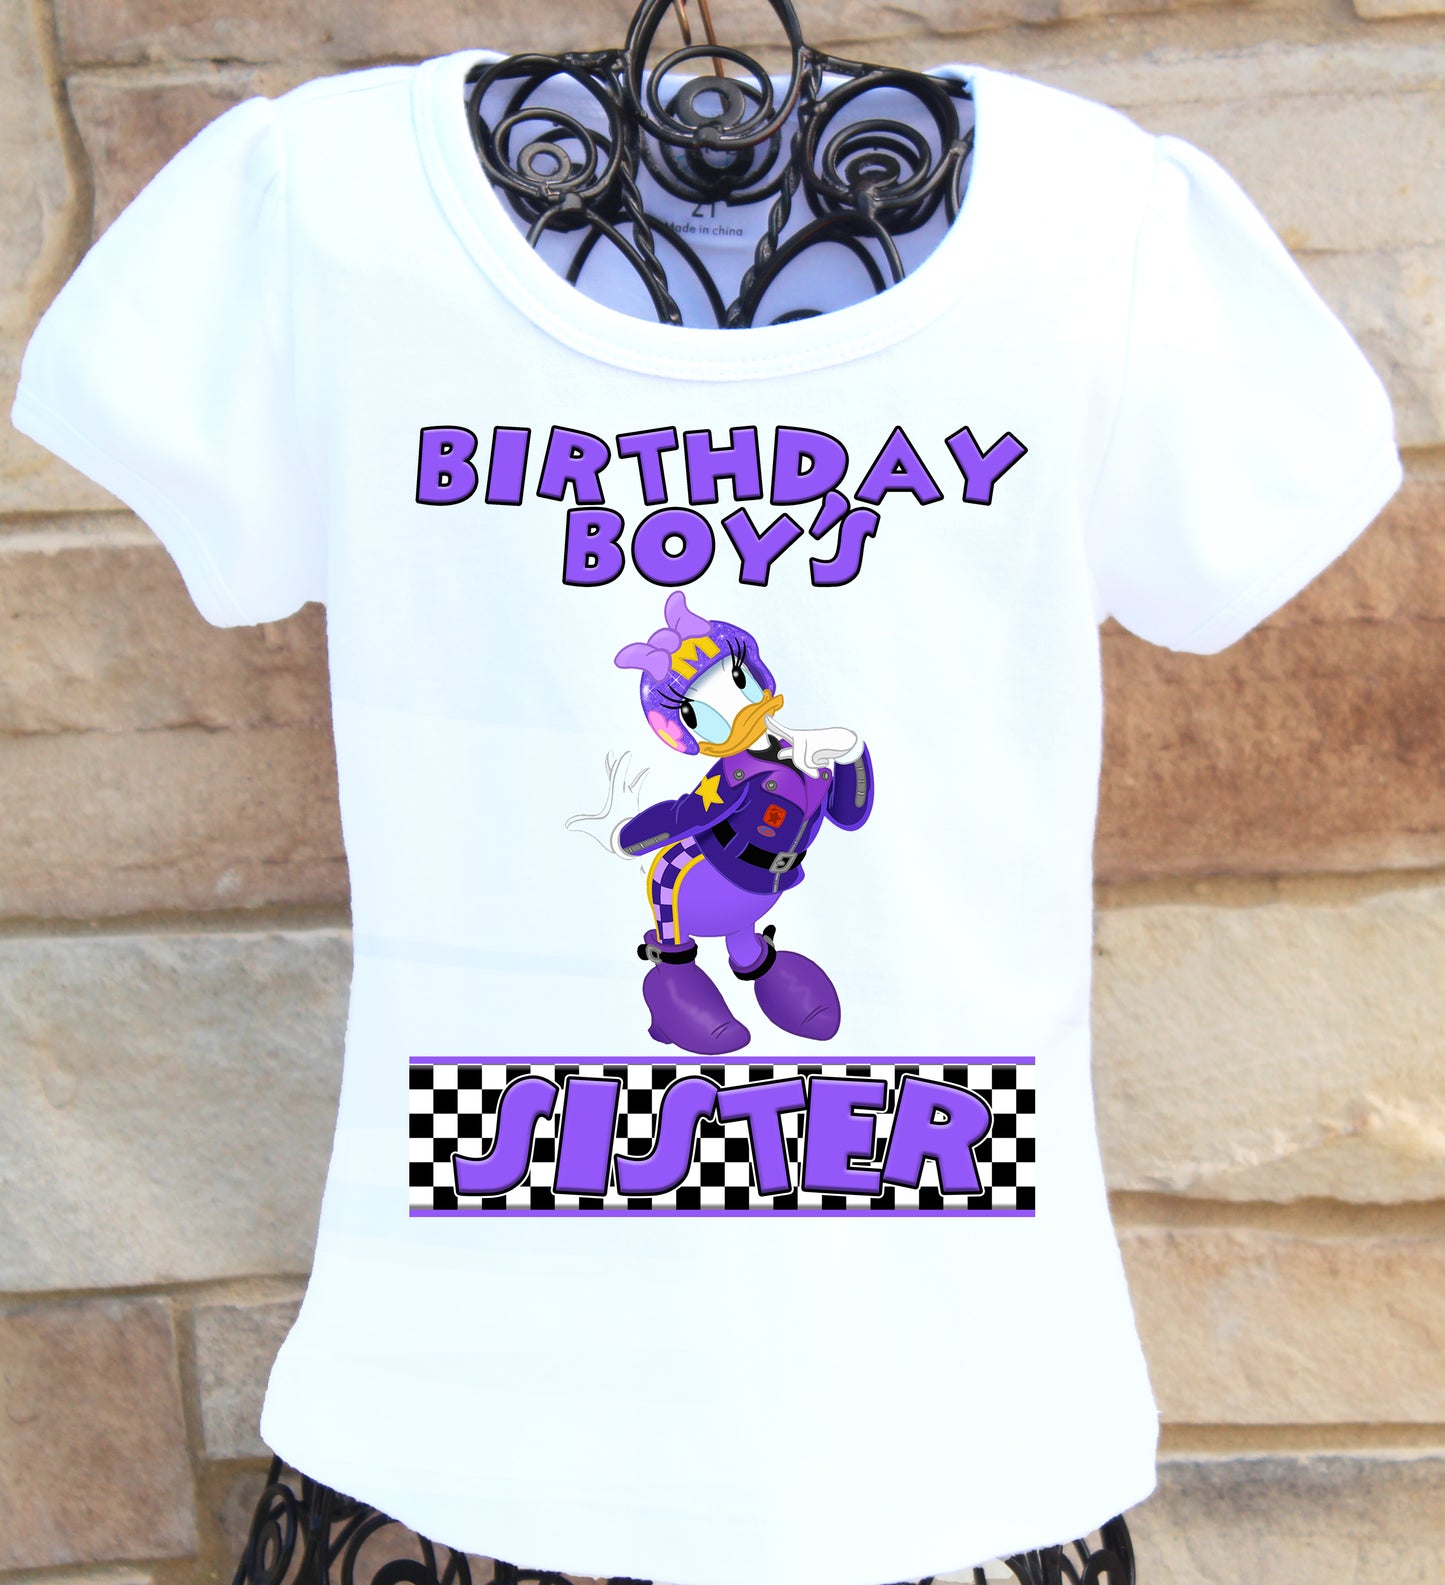 Mickey and the Roadster Racers Sister birthday shirt